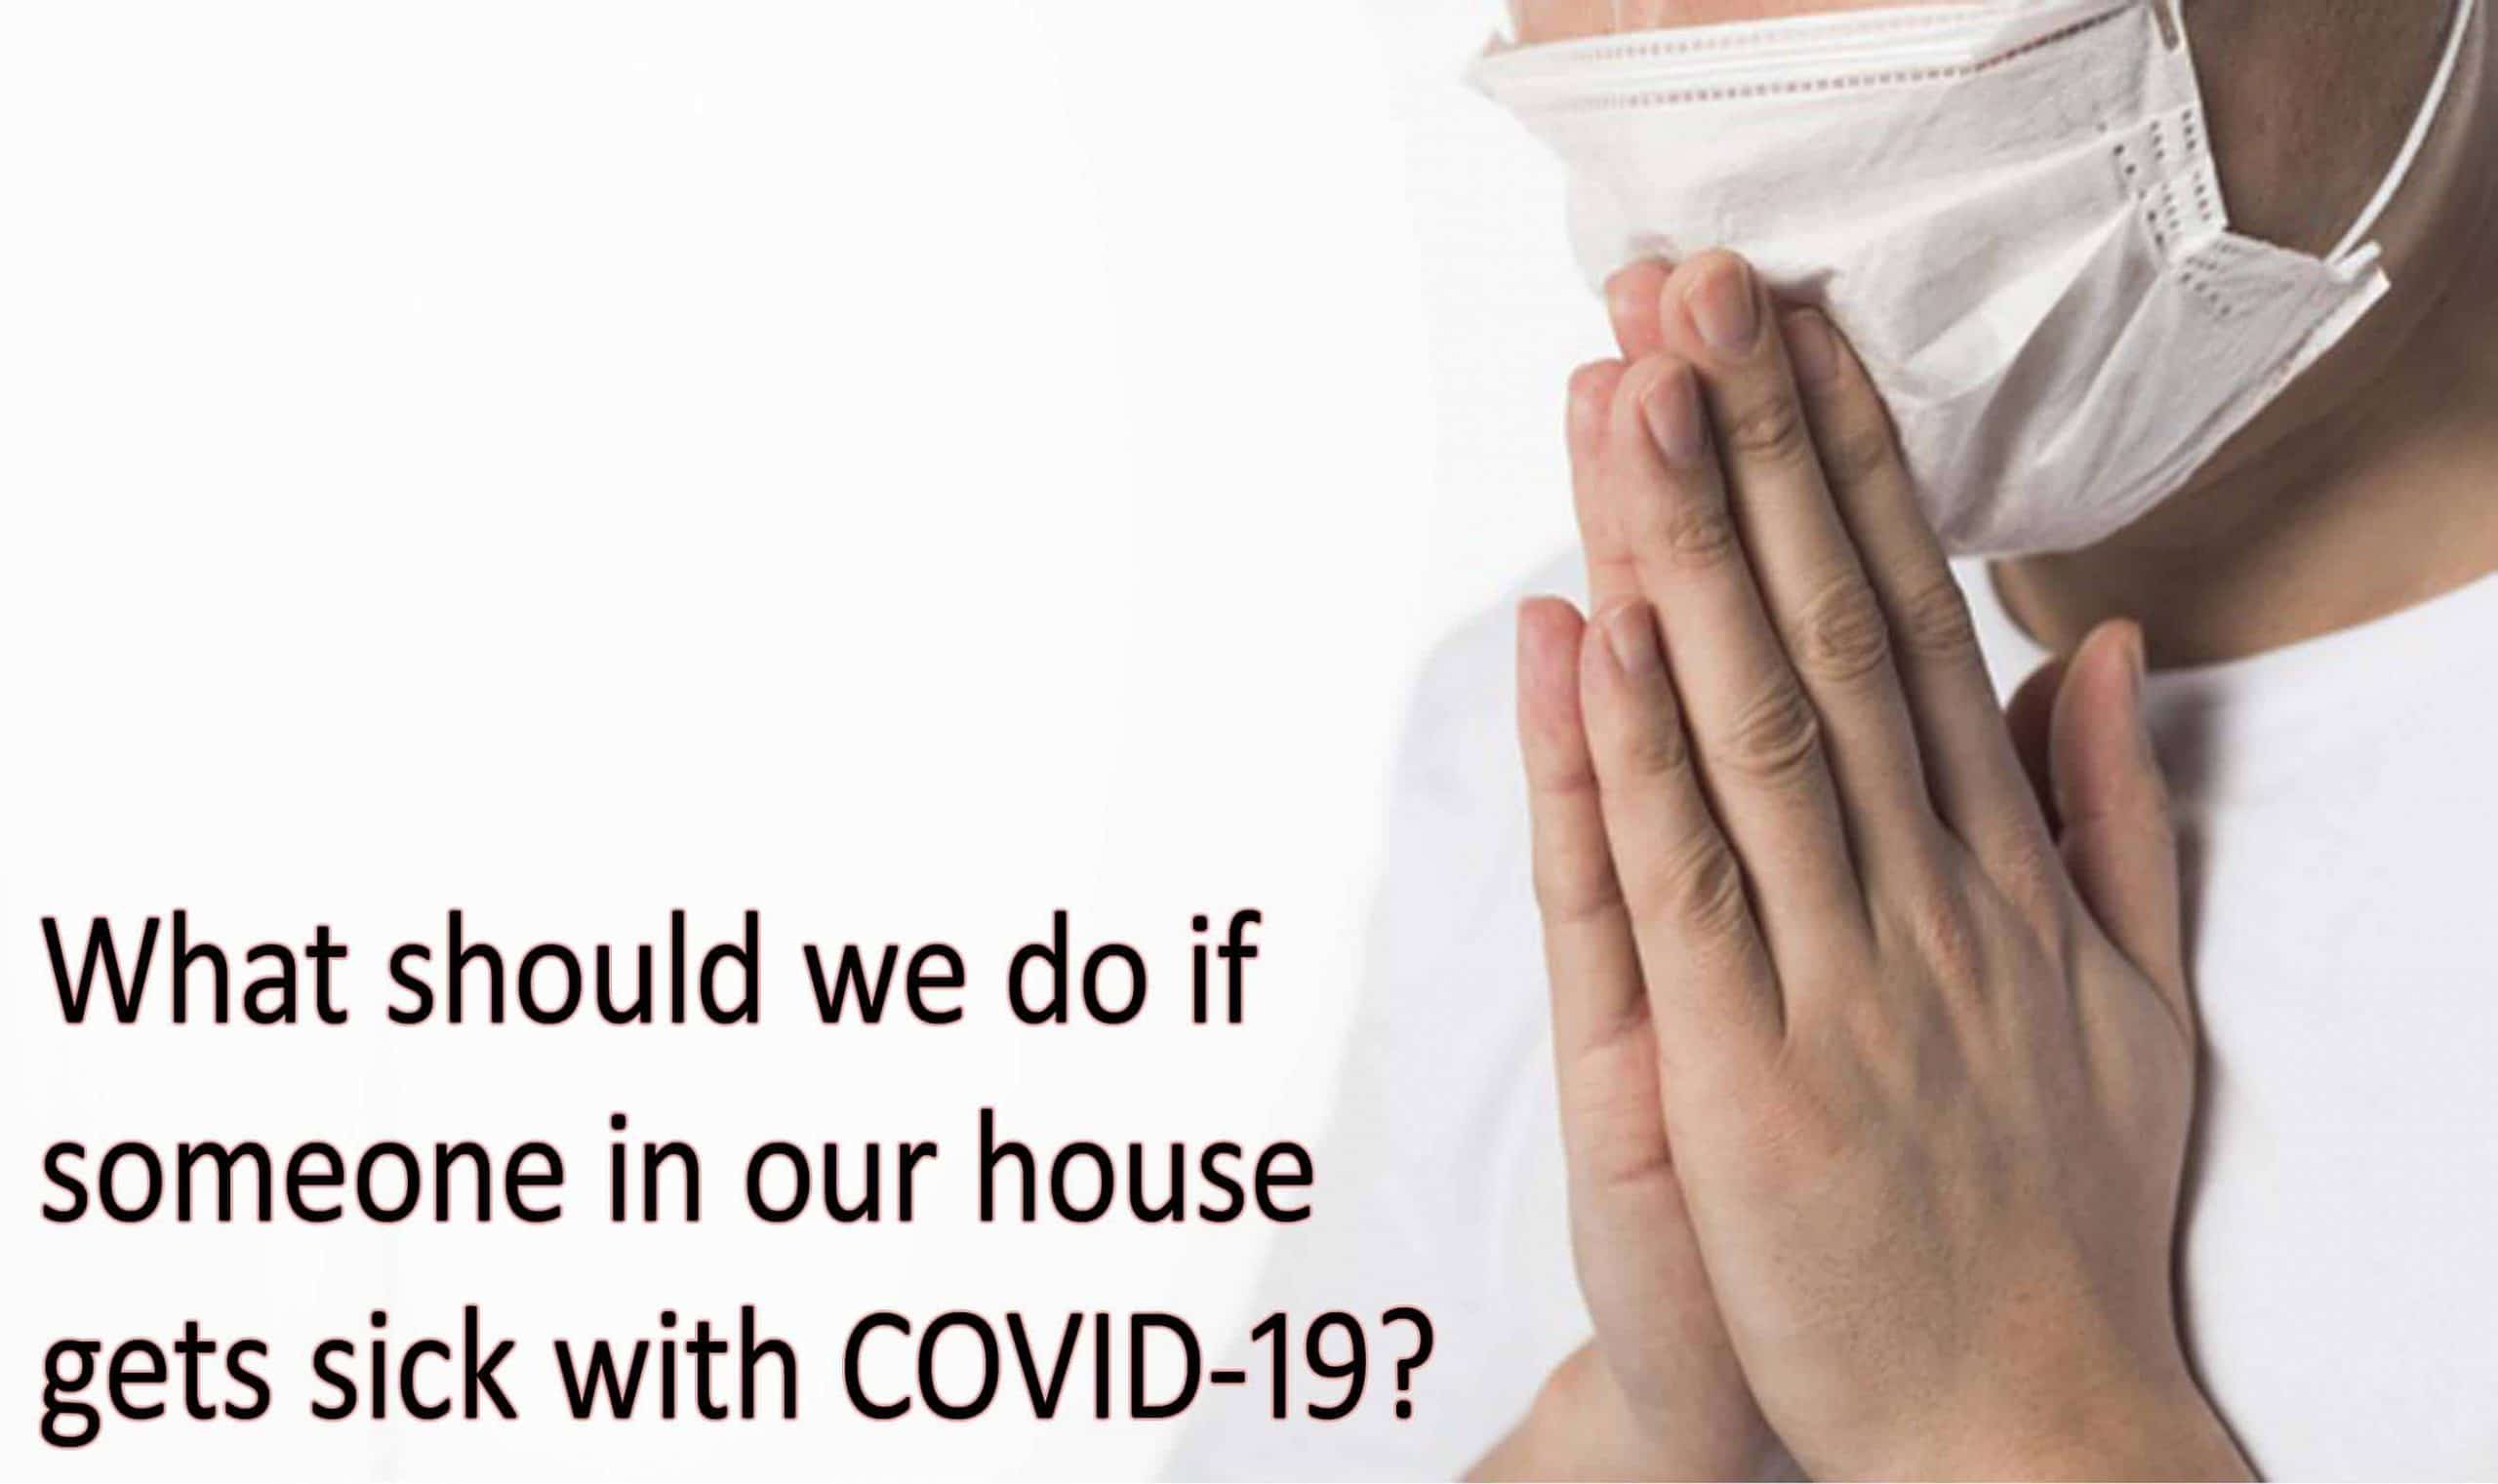 what should we do if someone in our house gets sick with COVID-19